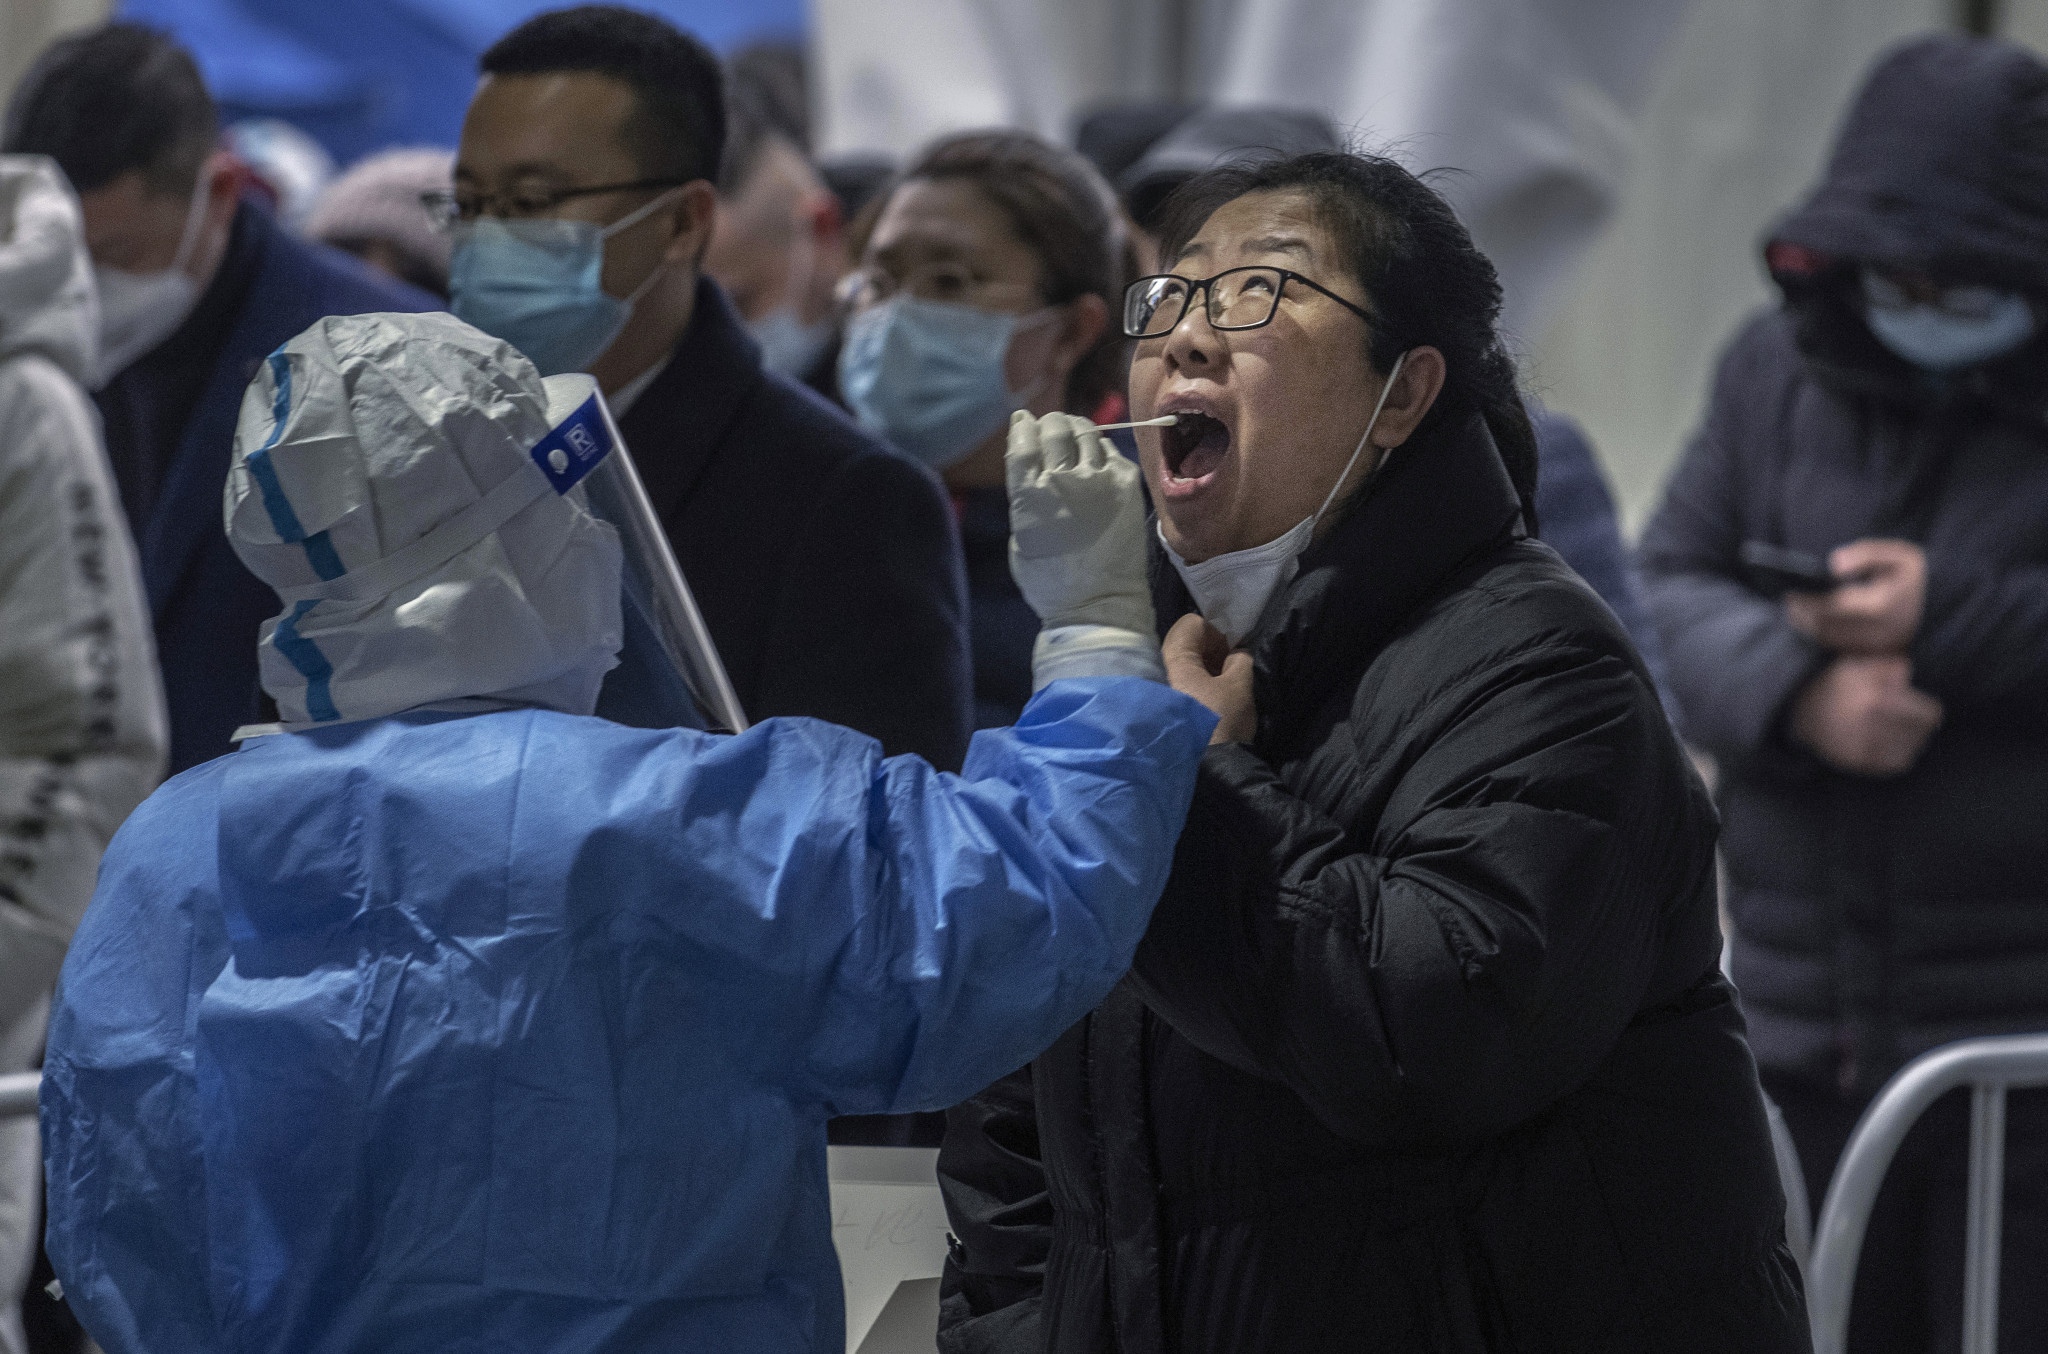 Beijing continue mass testing as more COVID cases reported prior to Winter Olympics